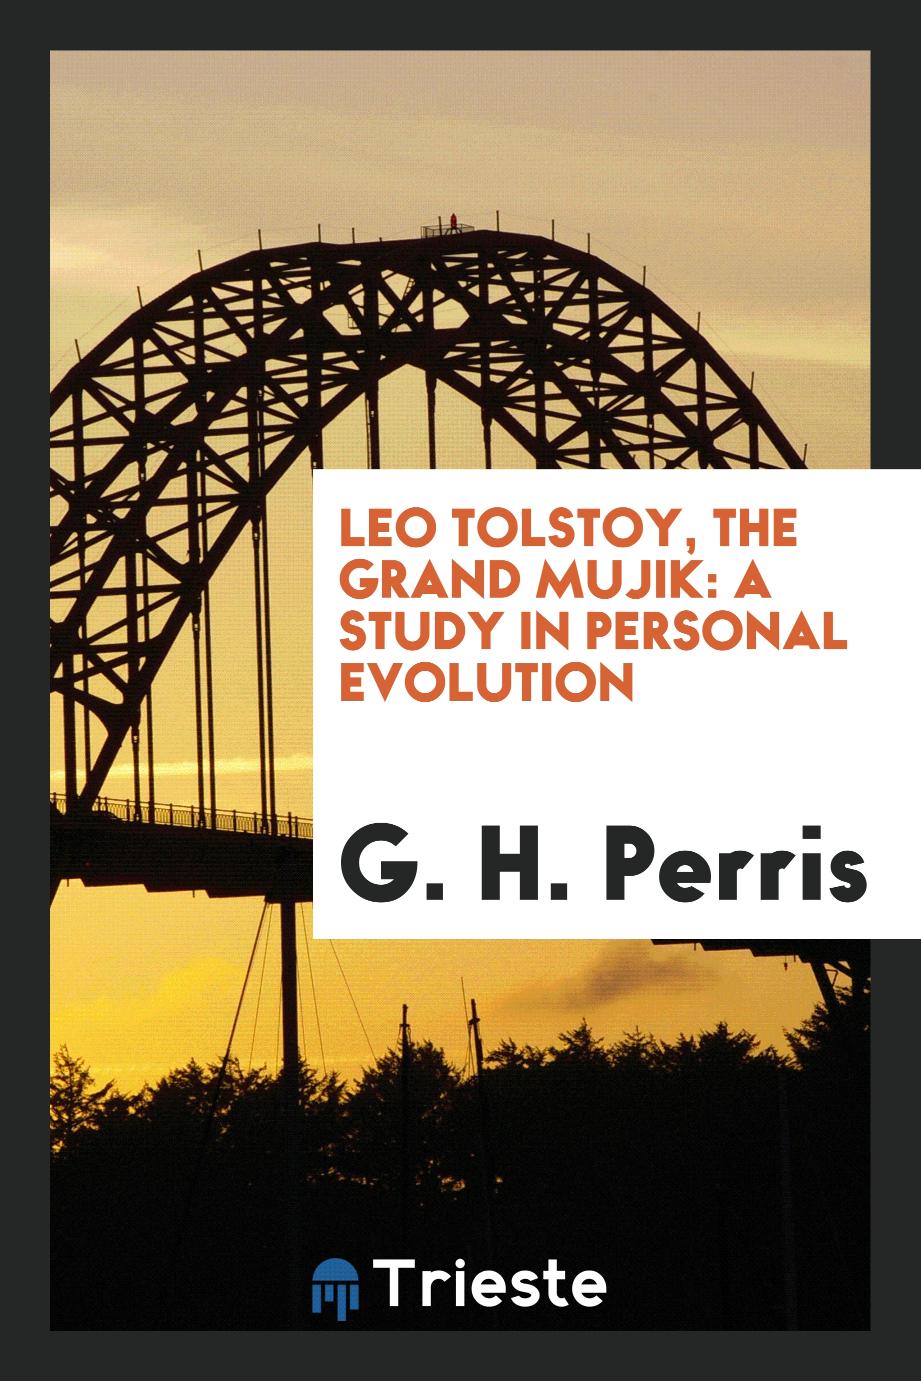 Leo Tolstoy, the Grand Mujik: A Study in Personal Evolution